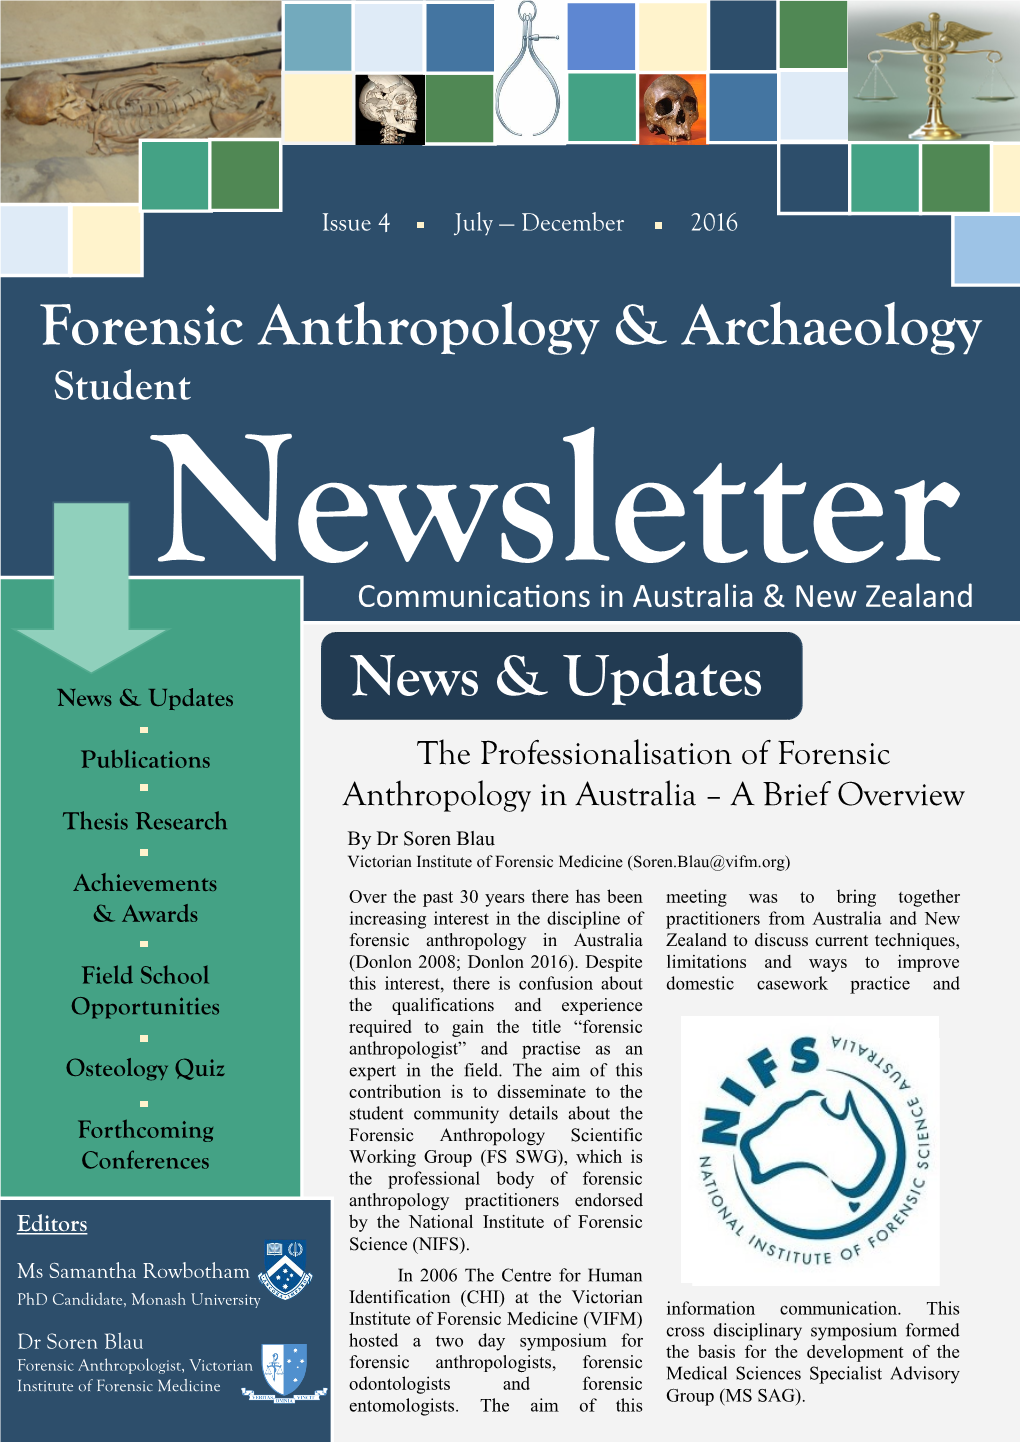 Forensic Anthropology & Archaeology News & Updates